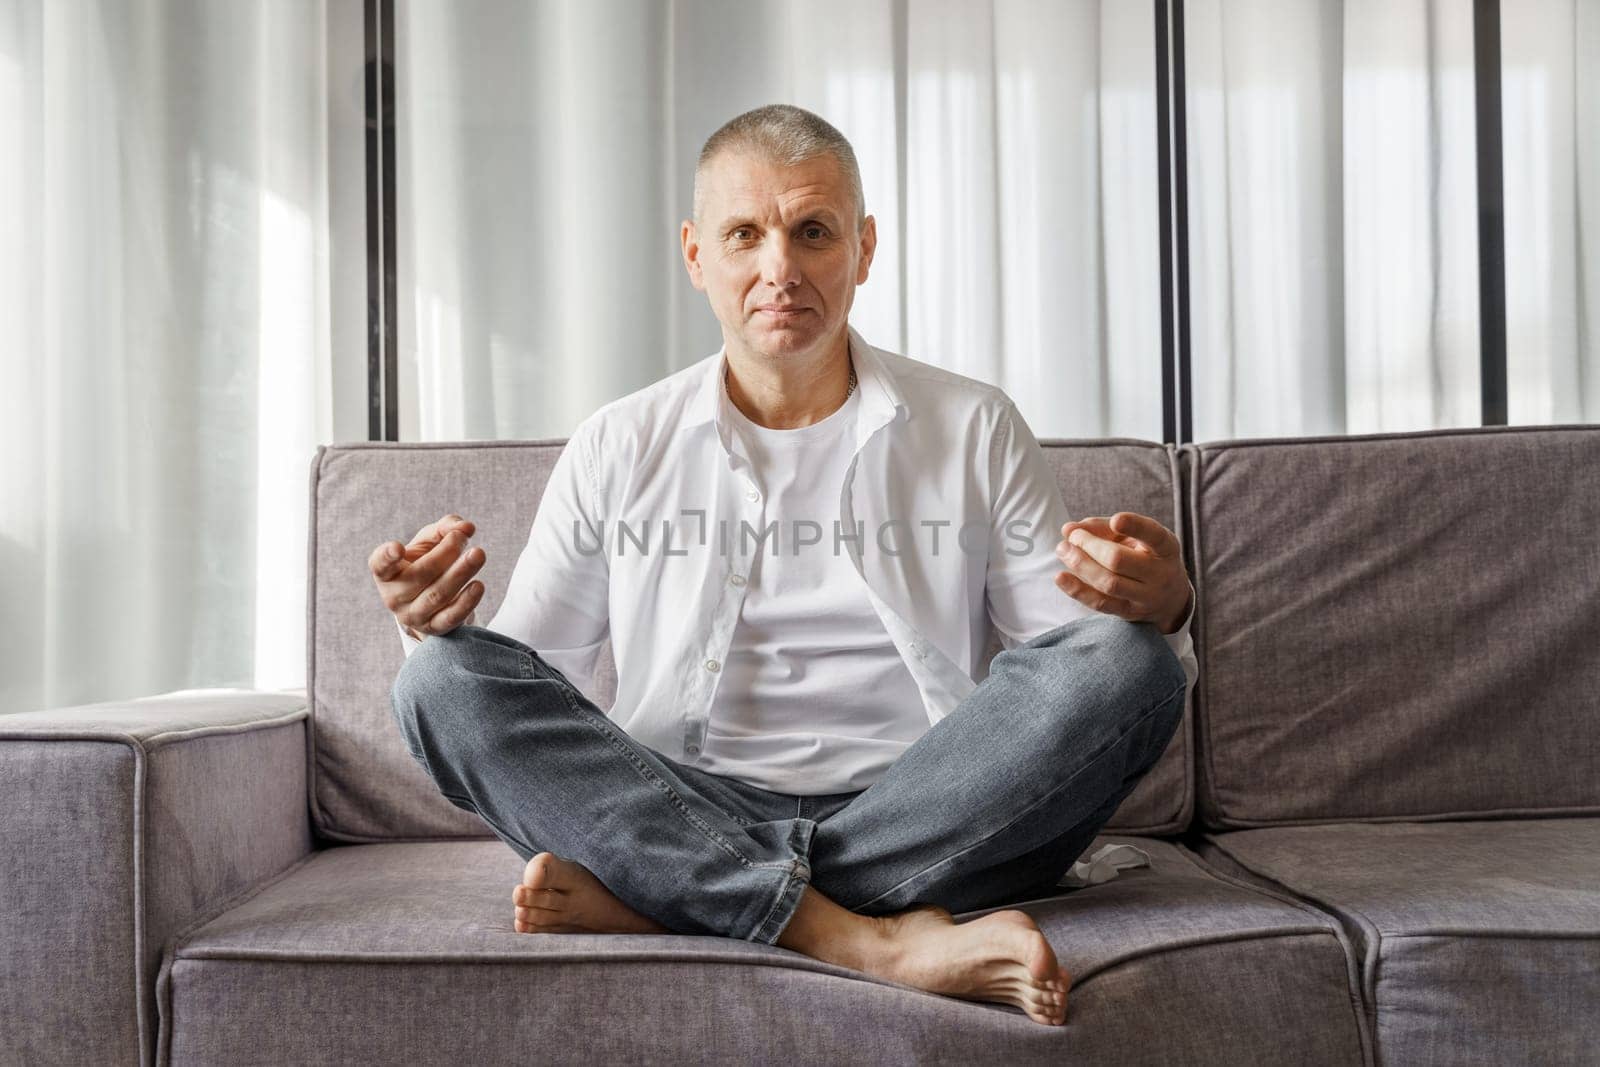 Portrait of a man who sits on a sofa in a room in a lotus position. The man is doing yoga.